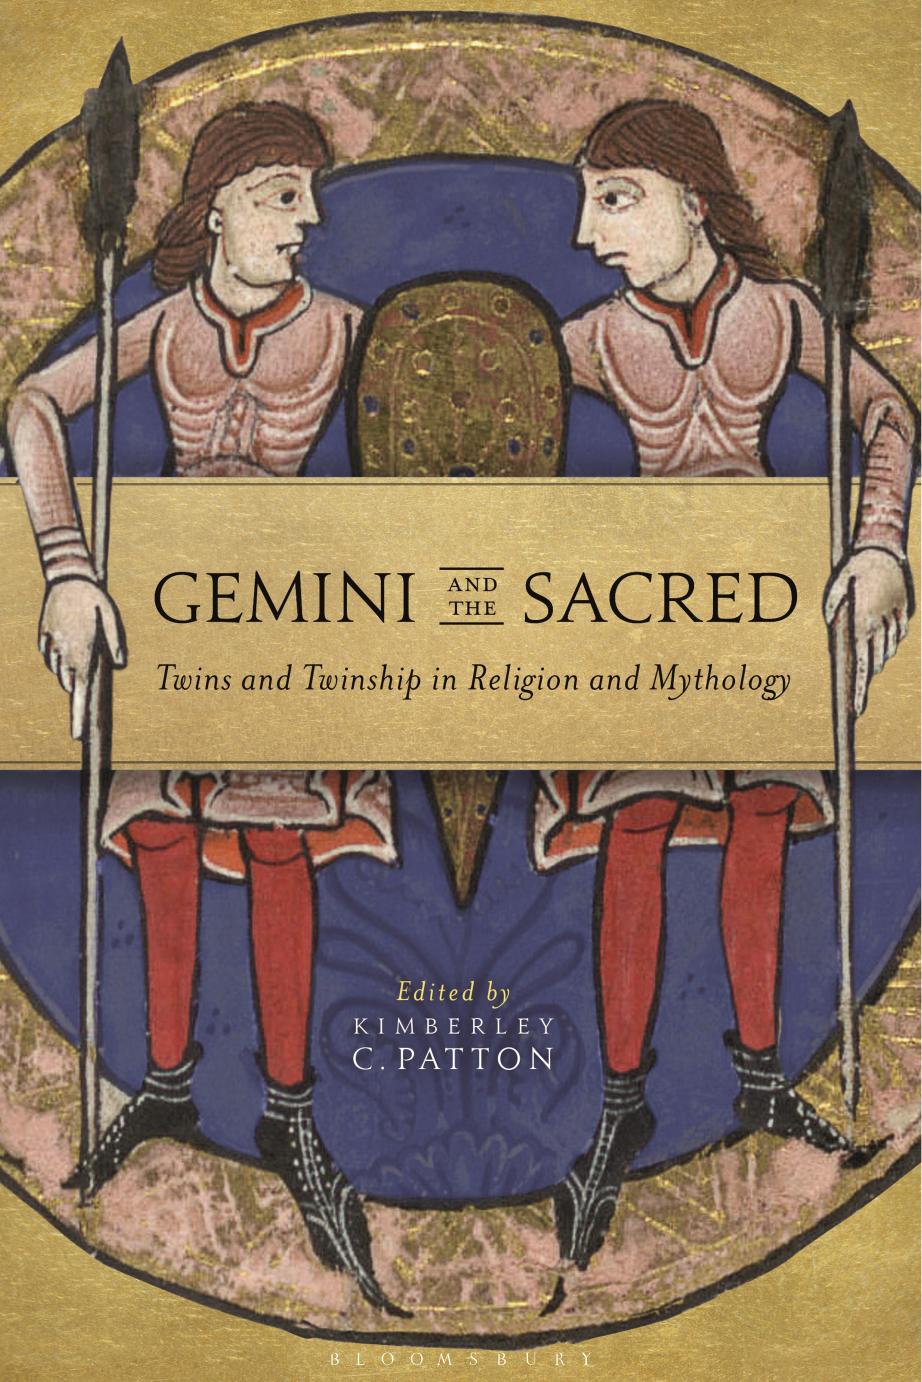 Gemini and the Sacred: Twins and Twinship in Religion and Mythology by Kimberley C. Patton